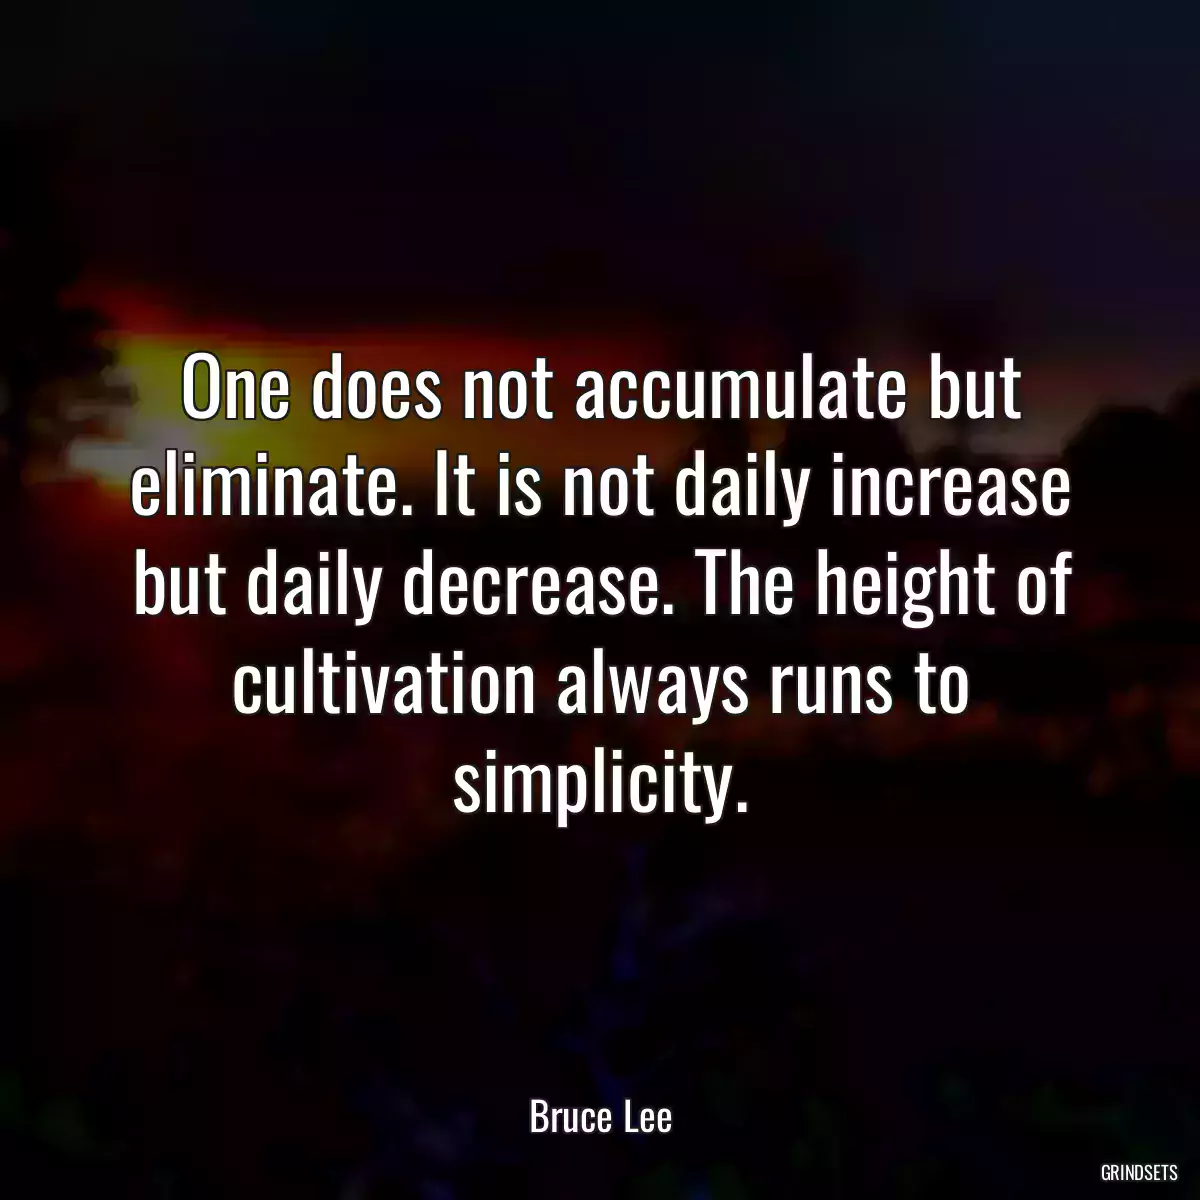 One does not accumulate but eliminate. It is not daily increase but daily decrease. The height of cultivation always runs to simplicity.